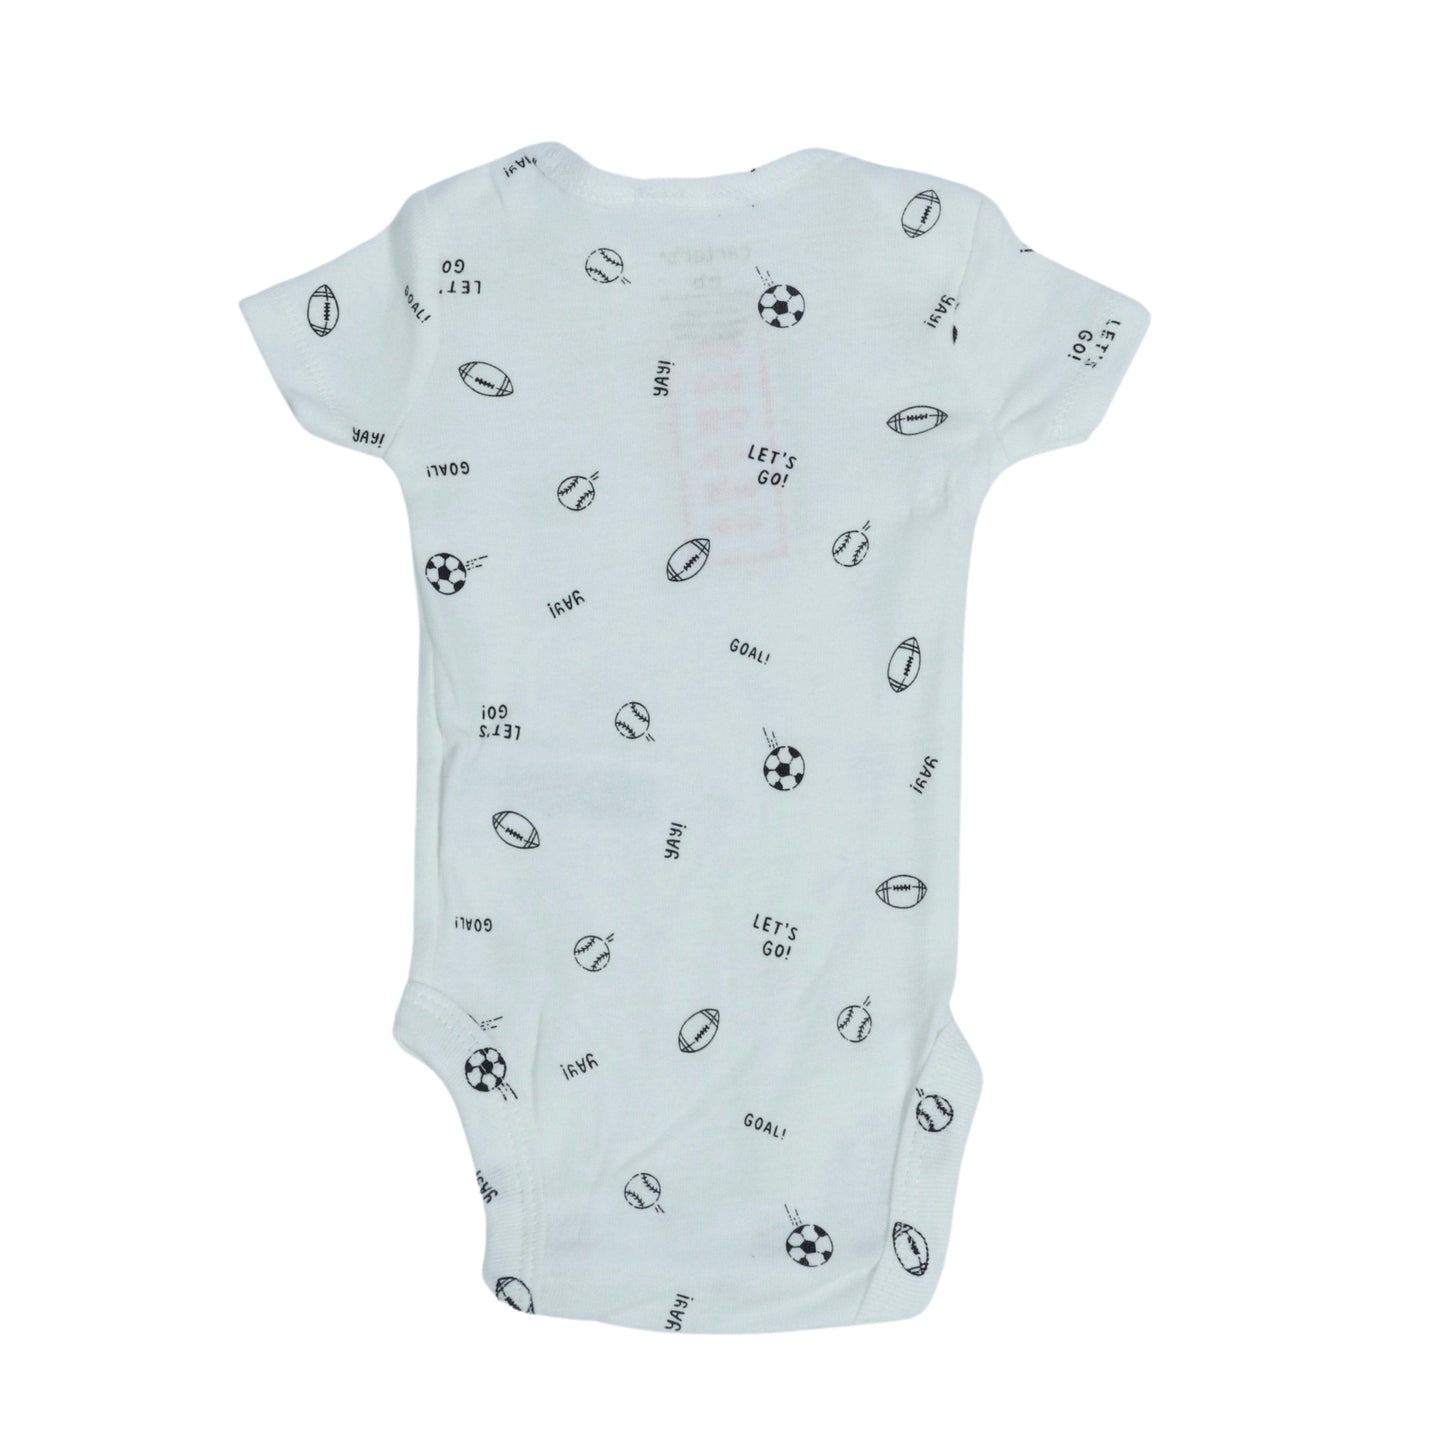 CARTER'S Baby Boy New Born / White CARTER'S - Baby - All Over Sports Print Bodysuit